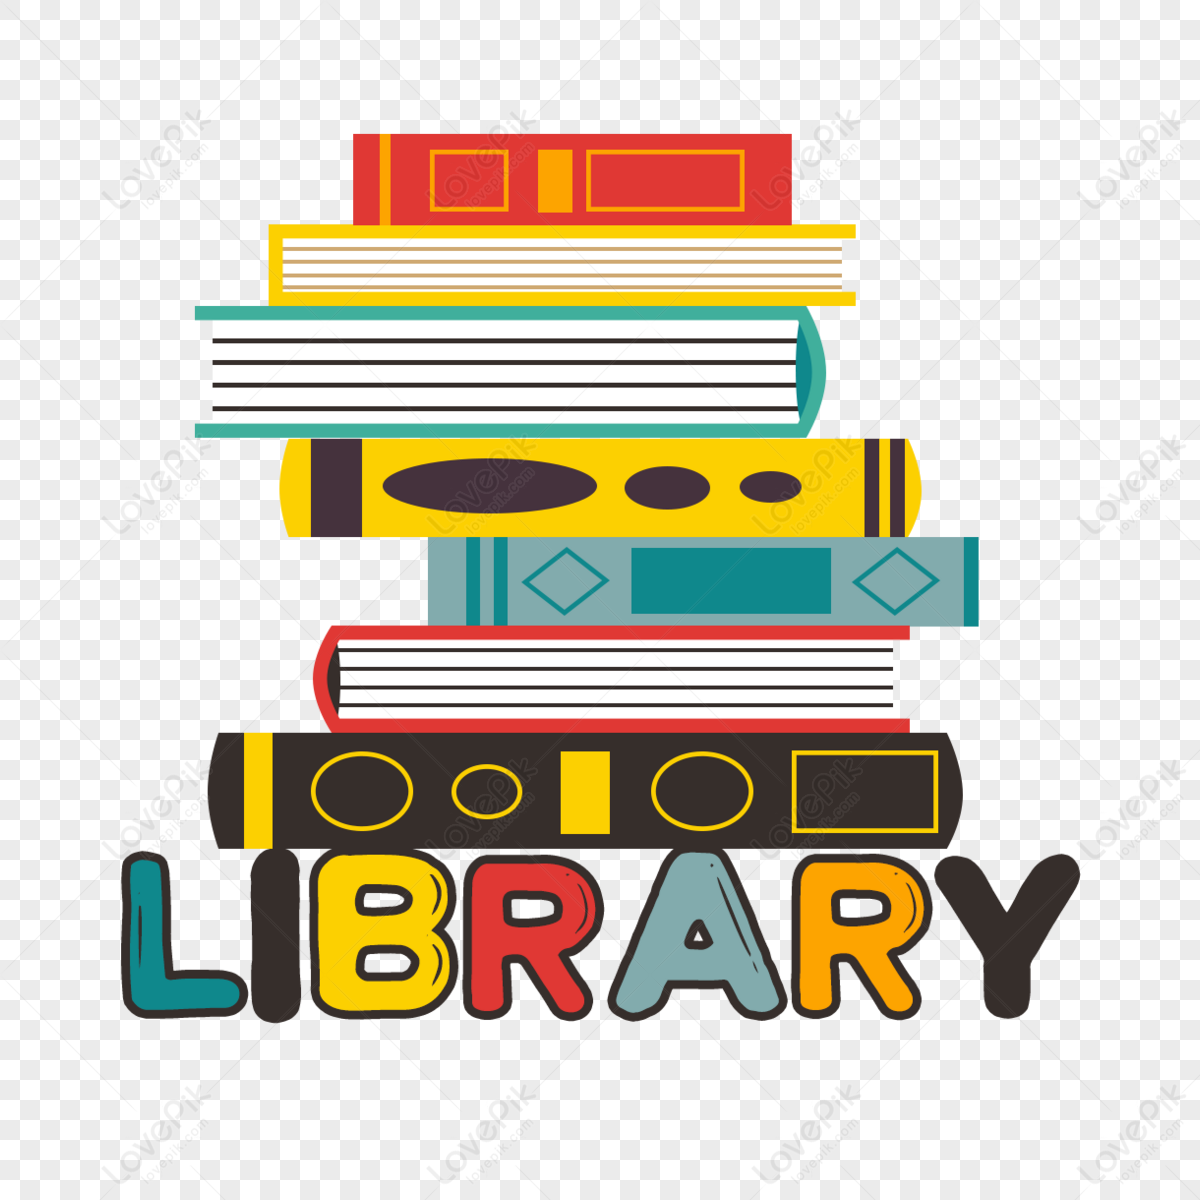 Hand-painted books display library,festival,celebration,school png transparent background